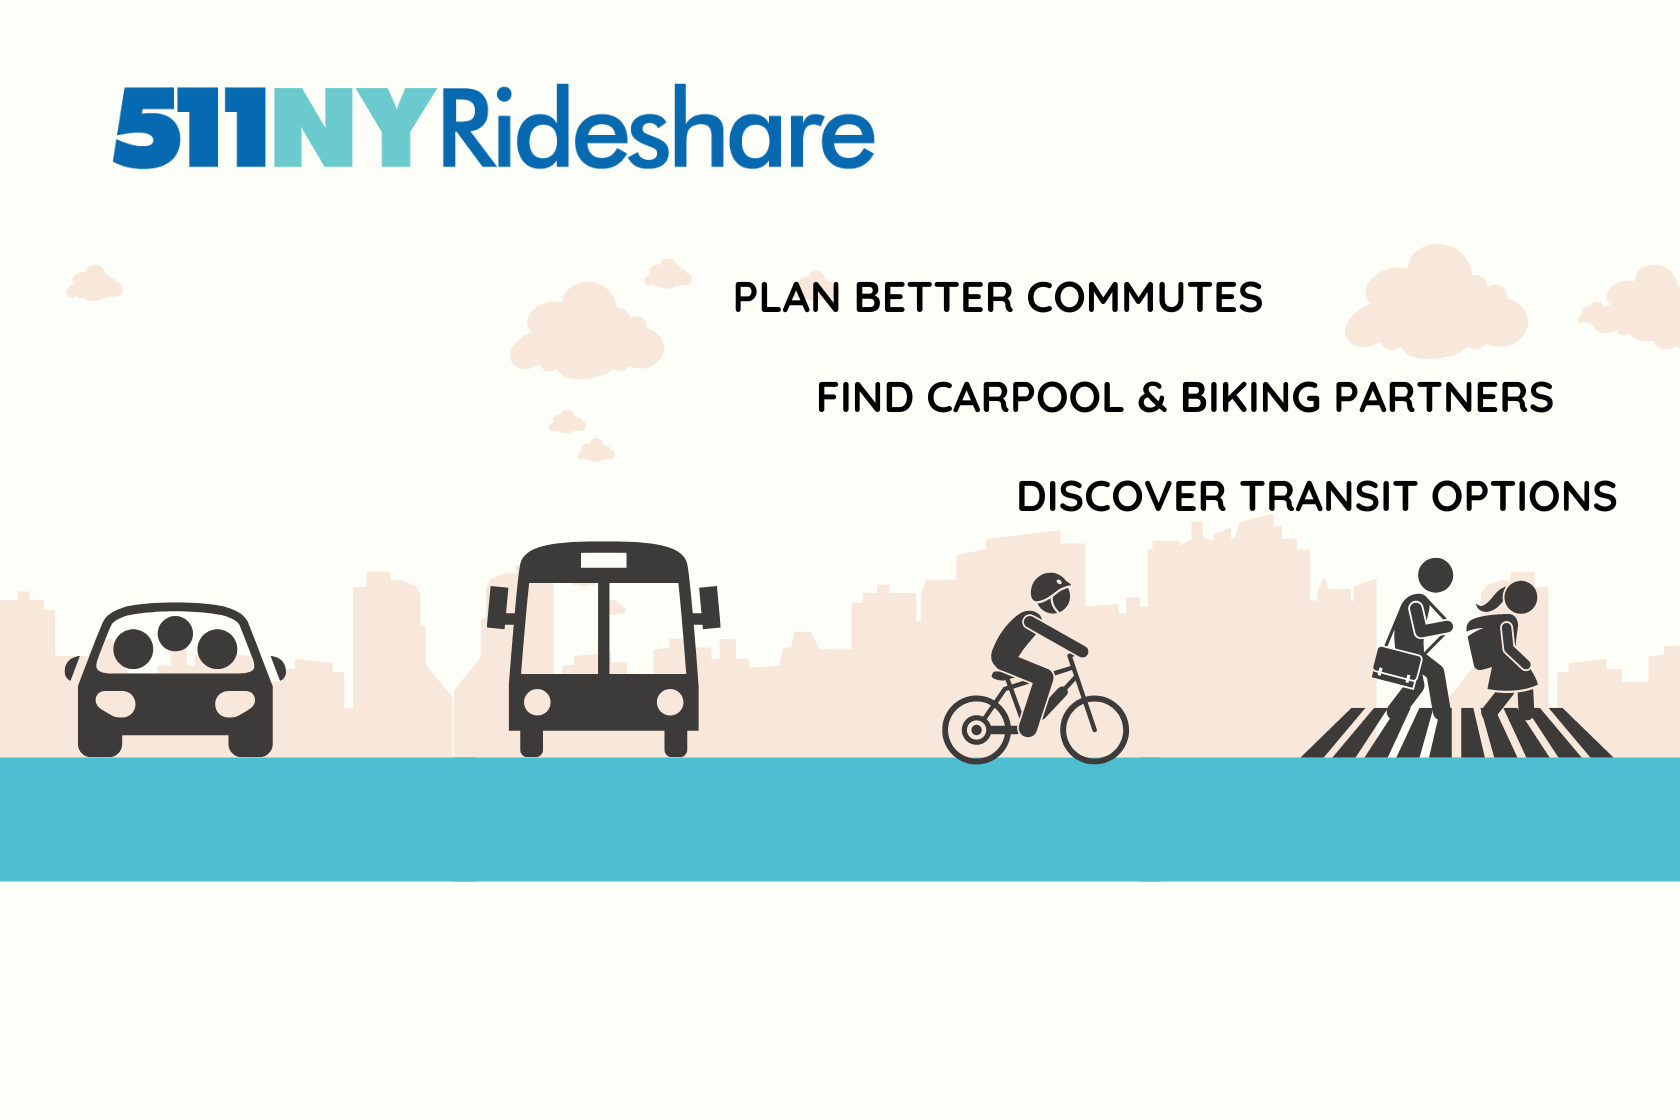 511NY Rideshare can help you find carpool and biking partners, and plan better commutes